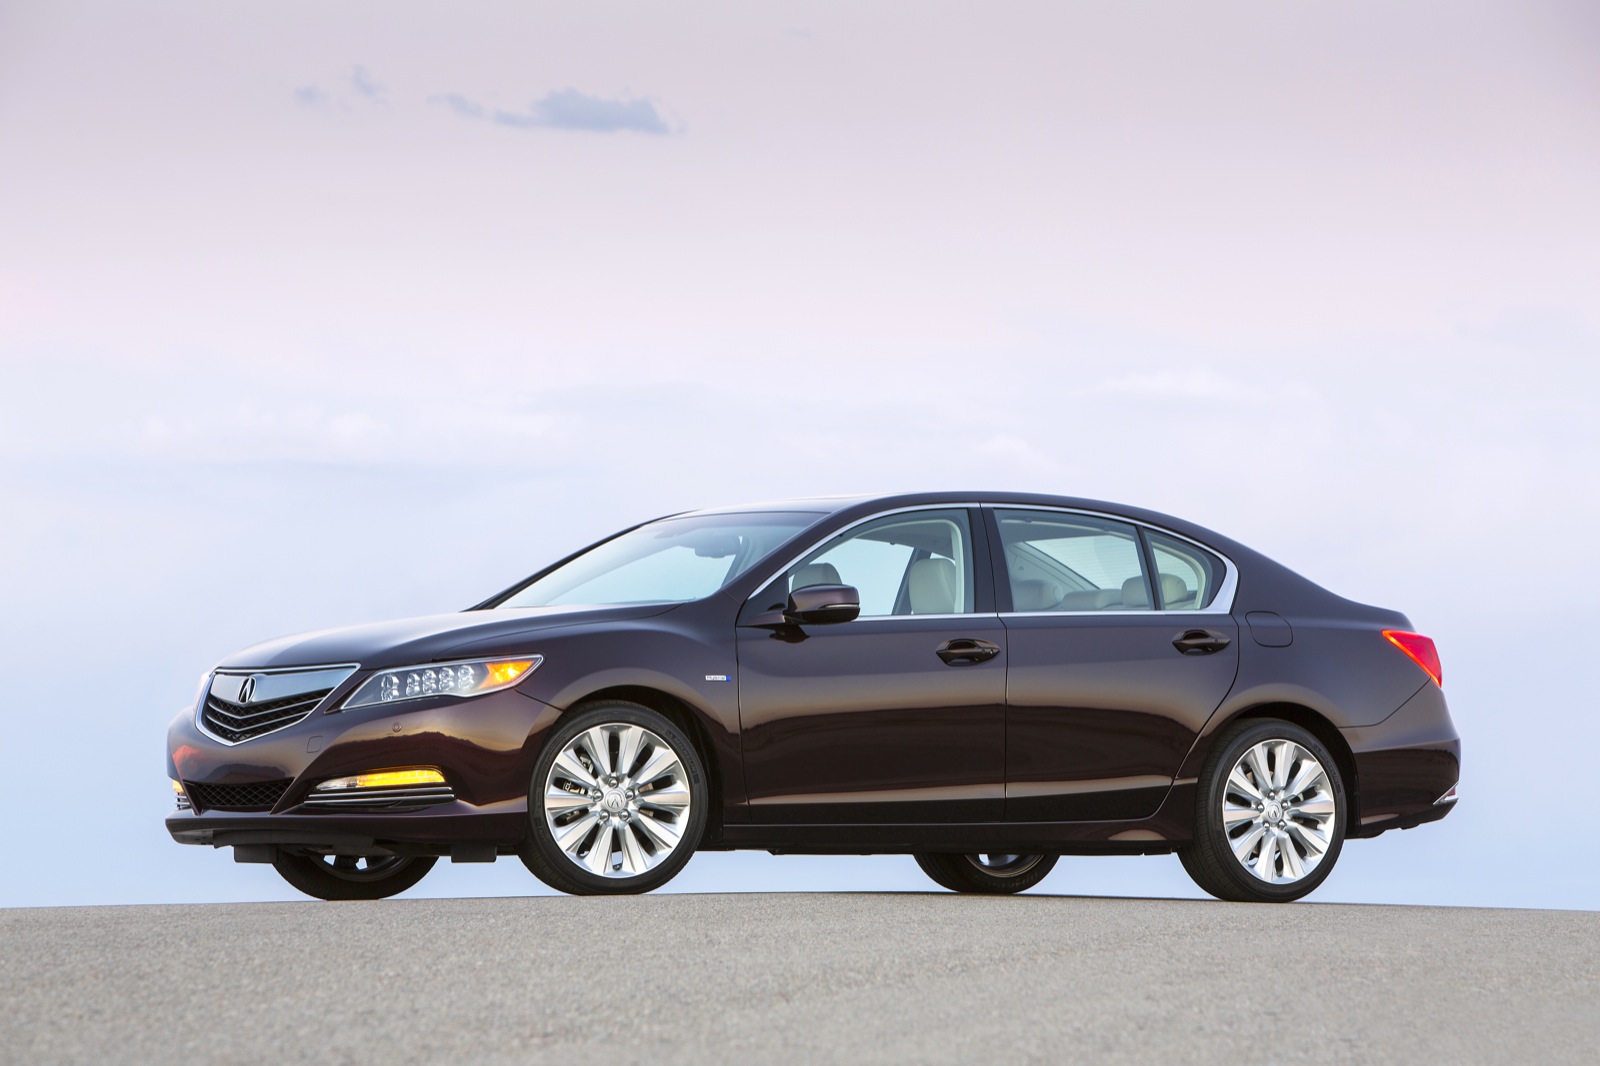 14 Acura Rlx Review Ratings Specs Prices And Photos The Car Connection